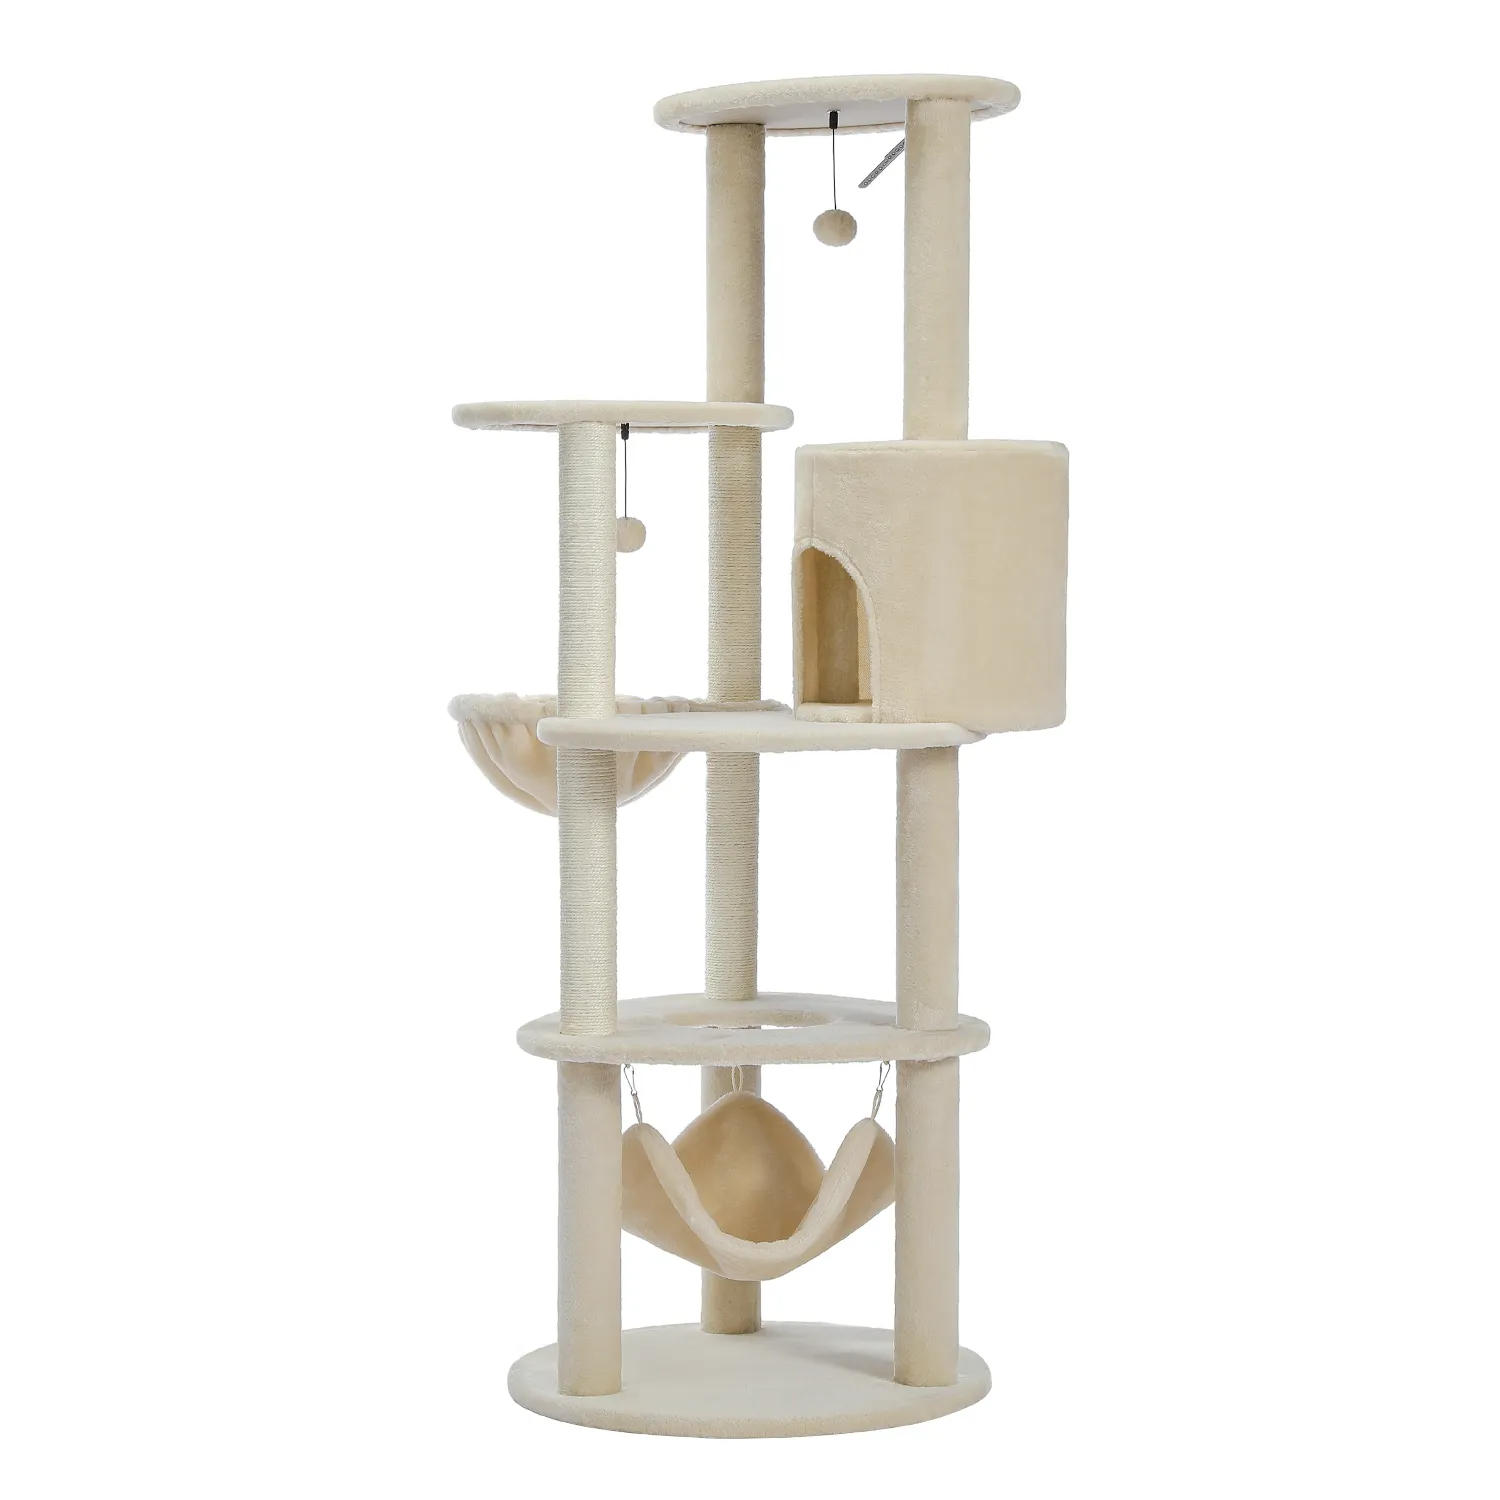 H152CM Large Cat Tree Tower Condo Perch Sisal Scratching Posts for Kitten Multi-Level Tower with Fully Ball Hummock Grey & Beige